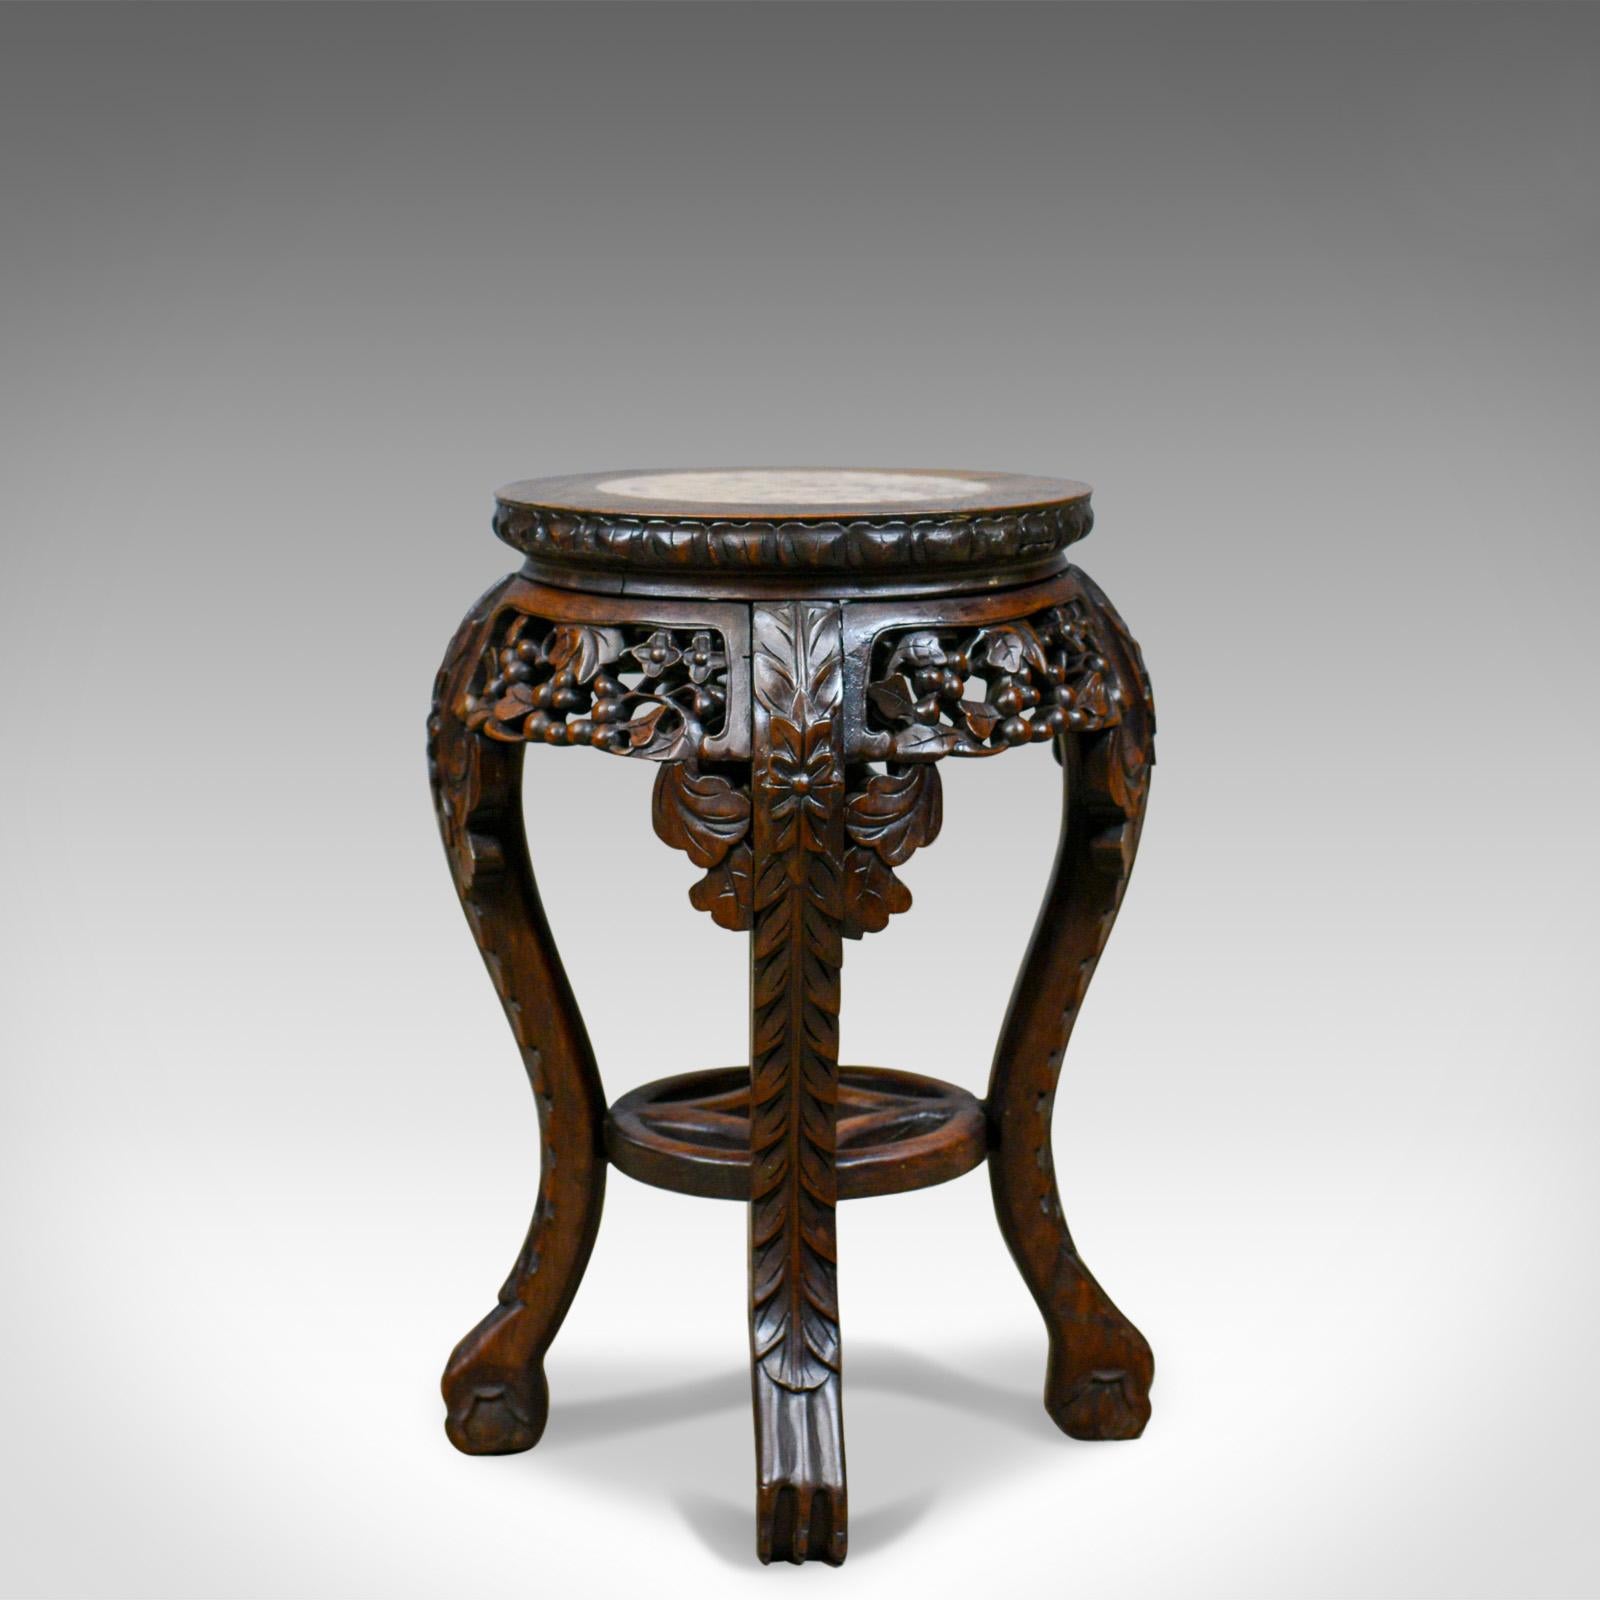 This is an antique side table, a carved Chinese stand in teak and marble, dating to the early 20th century, circa 1900.

Quality teak displaying good color and a desirable aged patina
Profusely carved with a dark, wax, polished finish
Classic